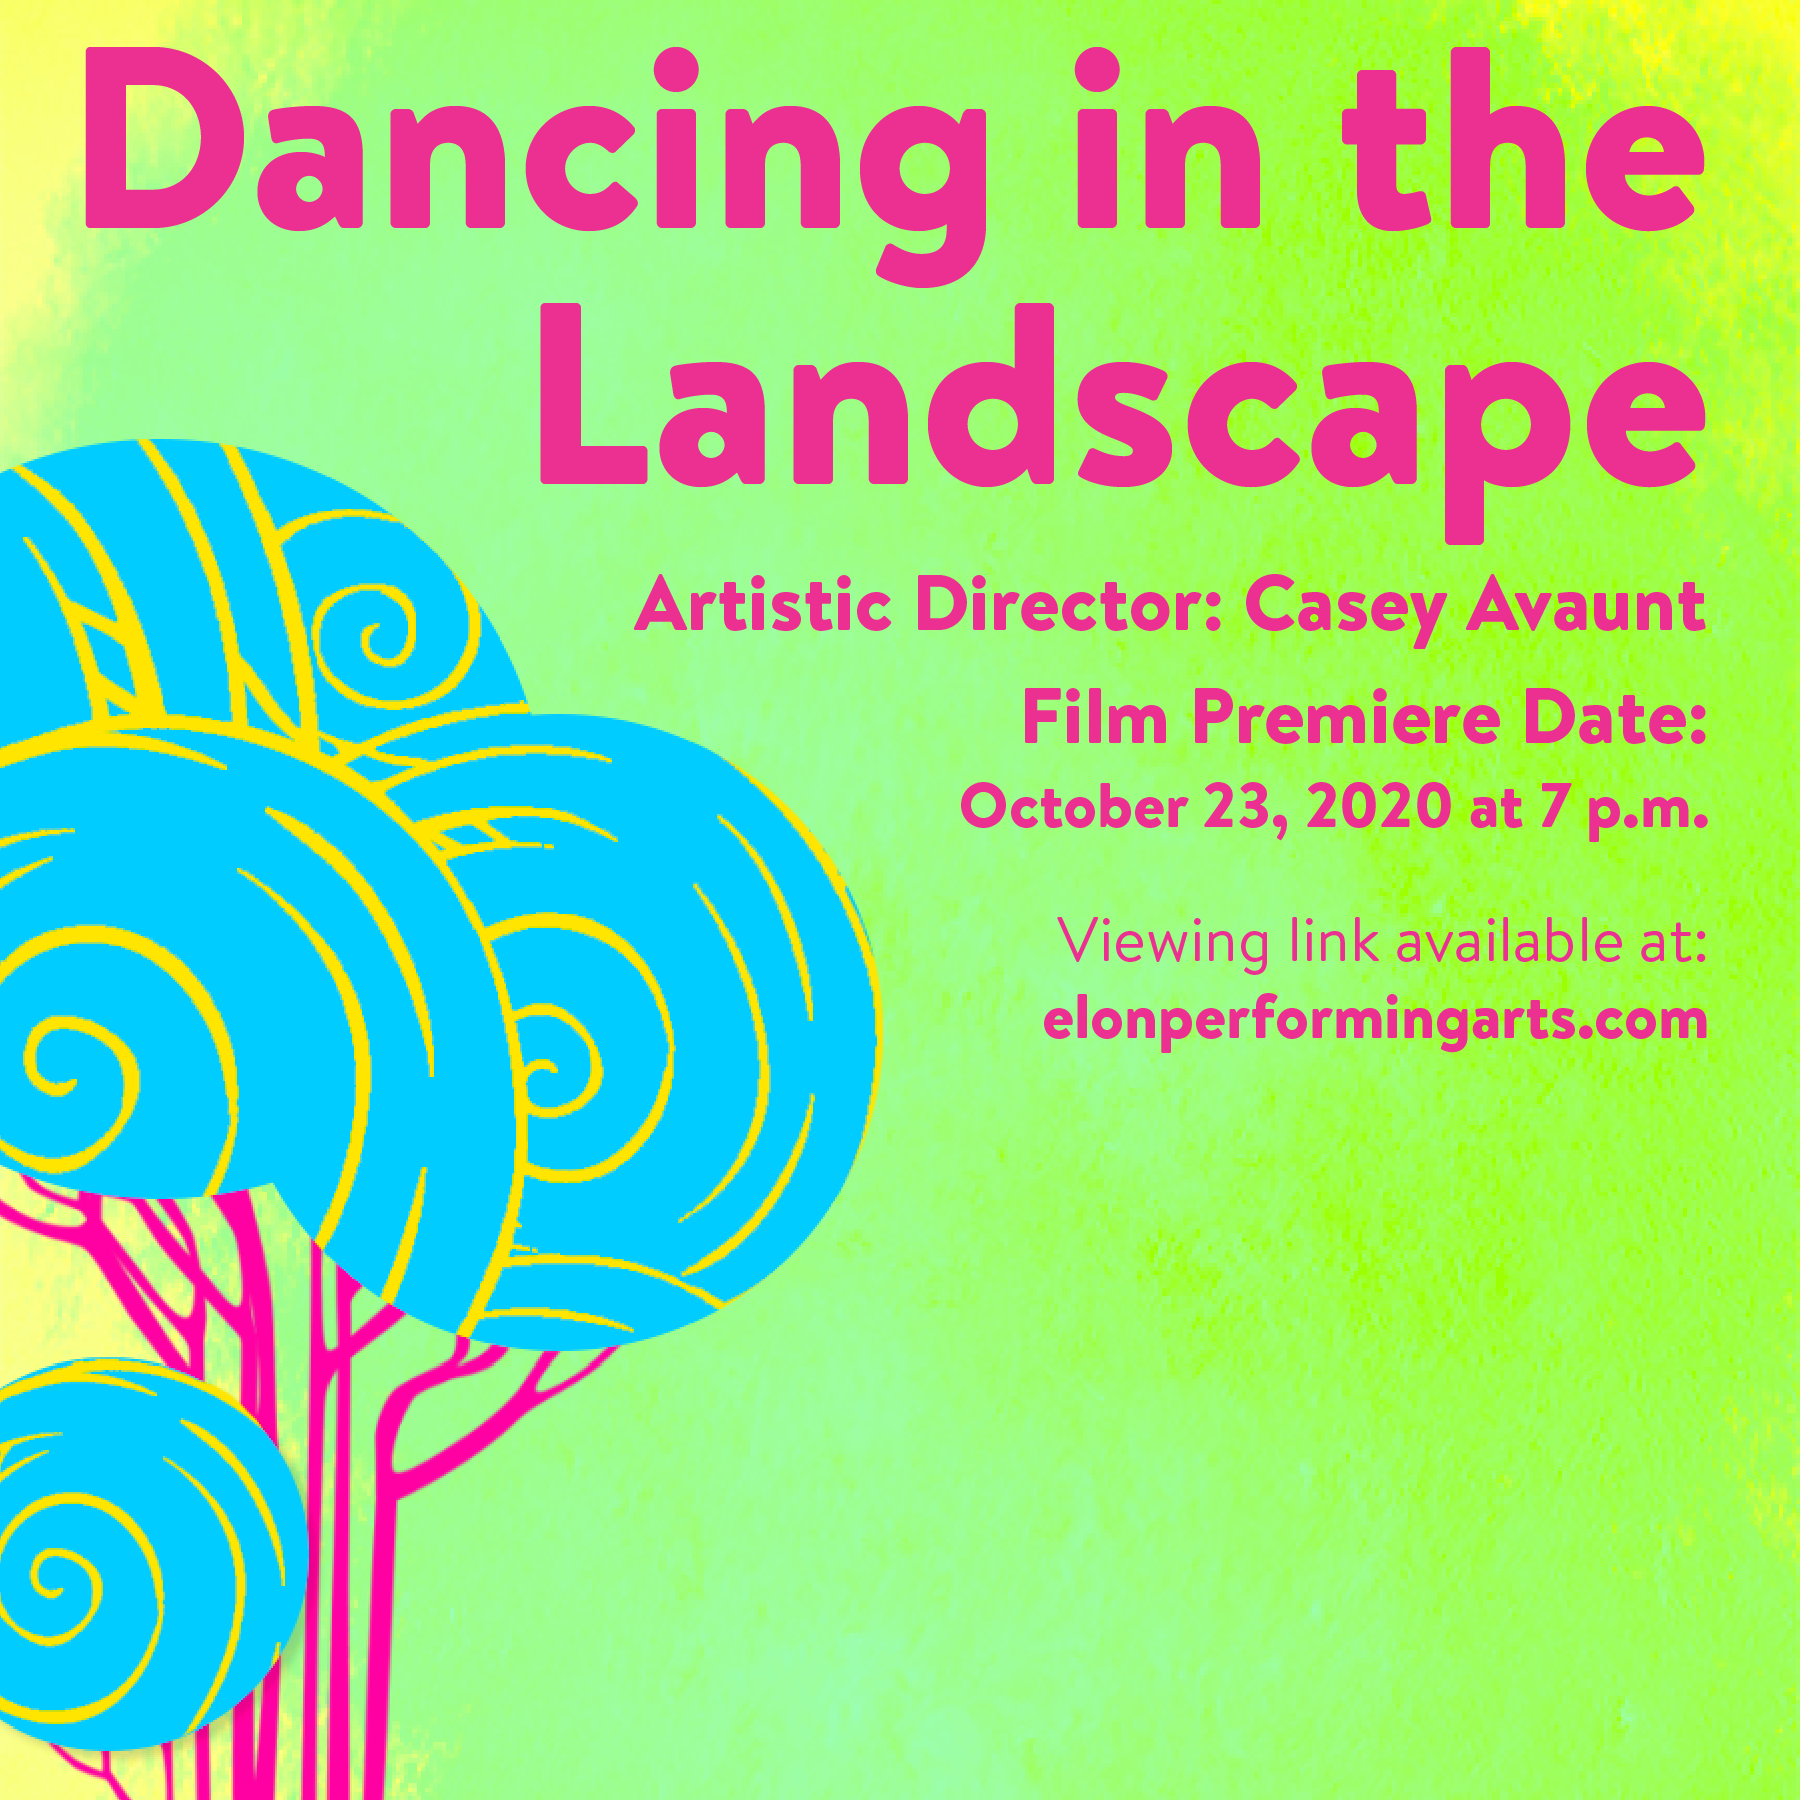 Dancing in the Landscape poster, Film Premiere Date: Oct. 23 at 7 pm